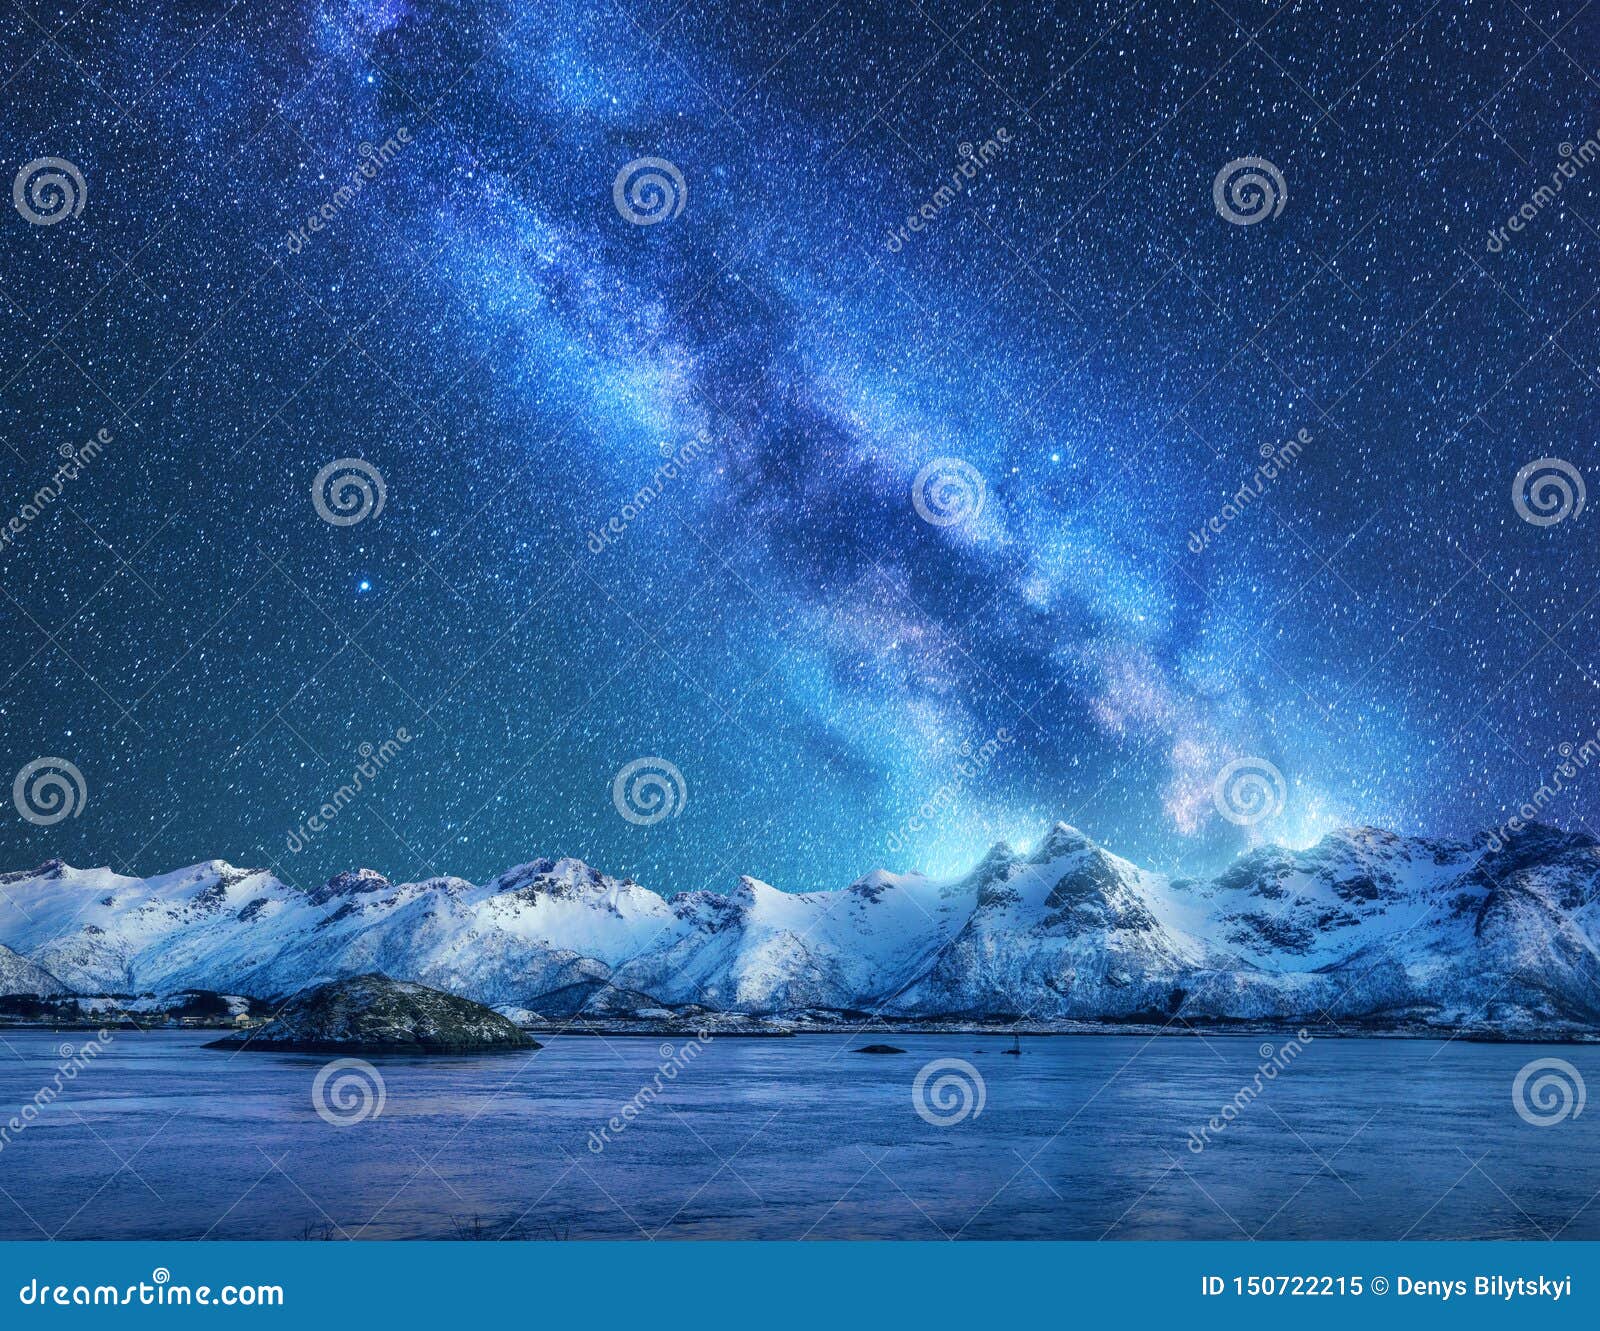 bright milky way over snow covered mountains and sea at night